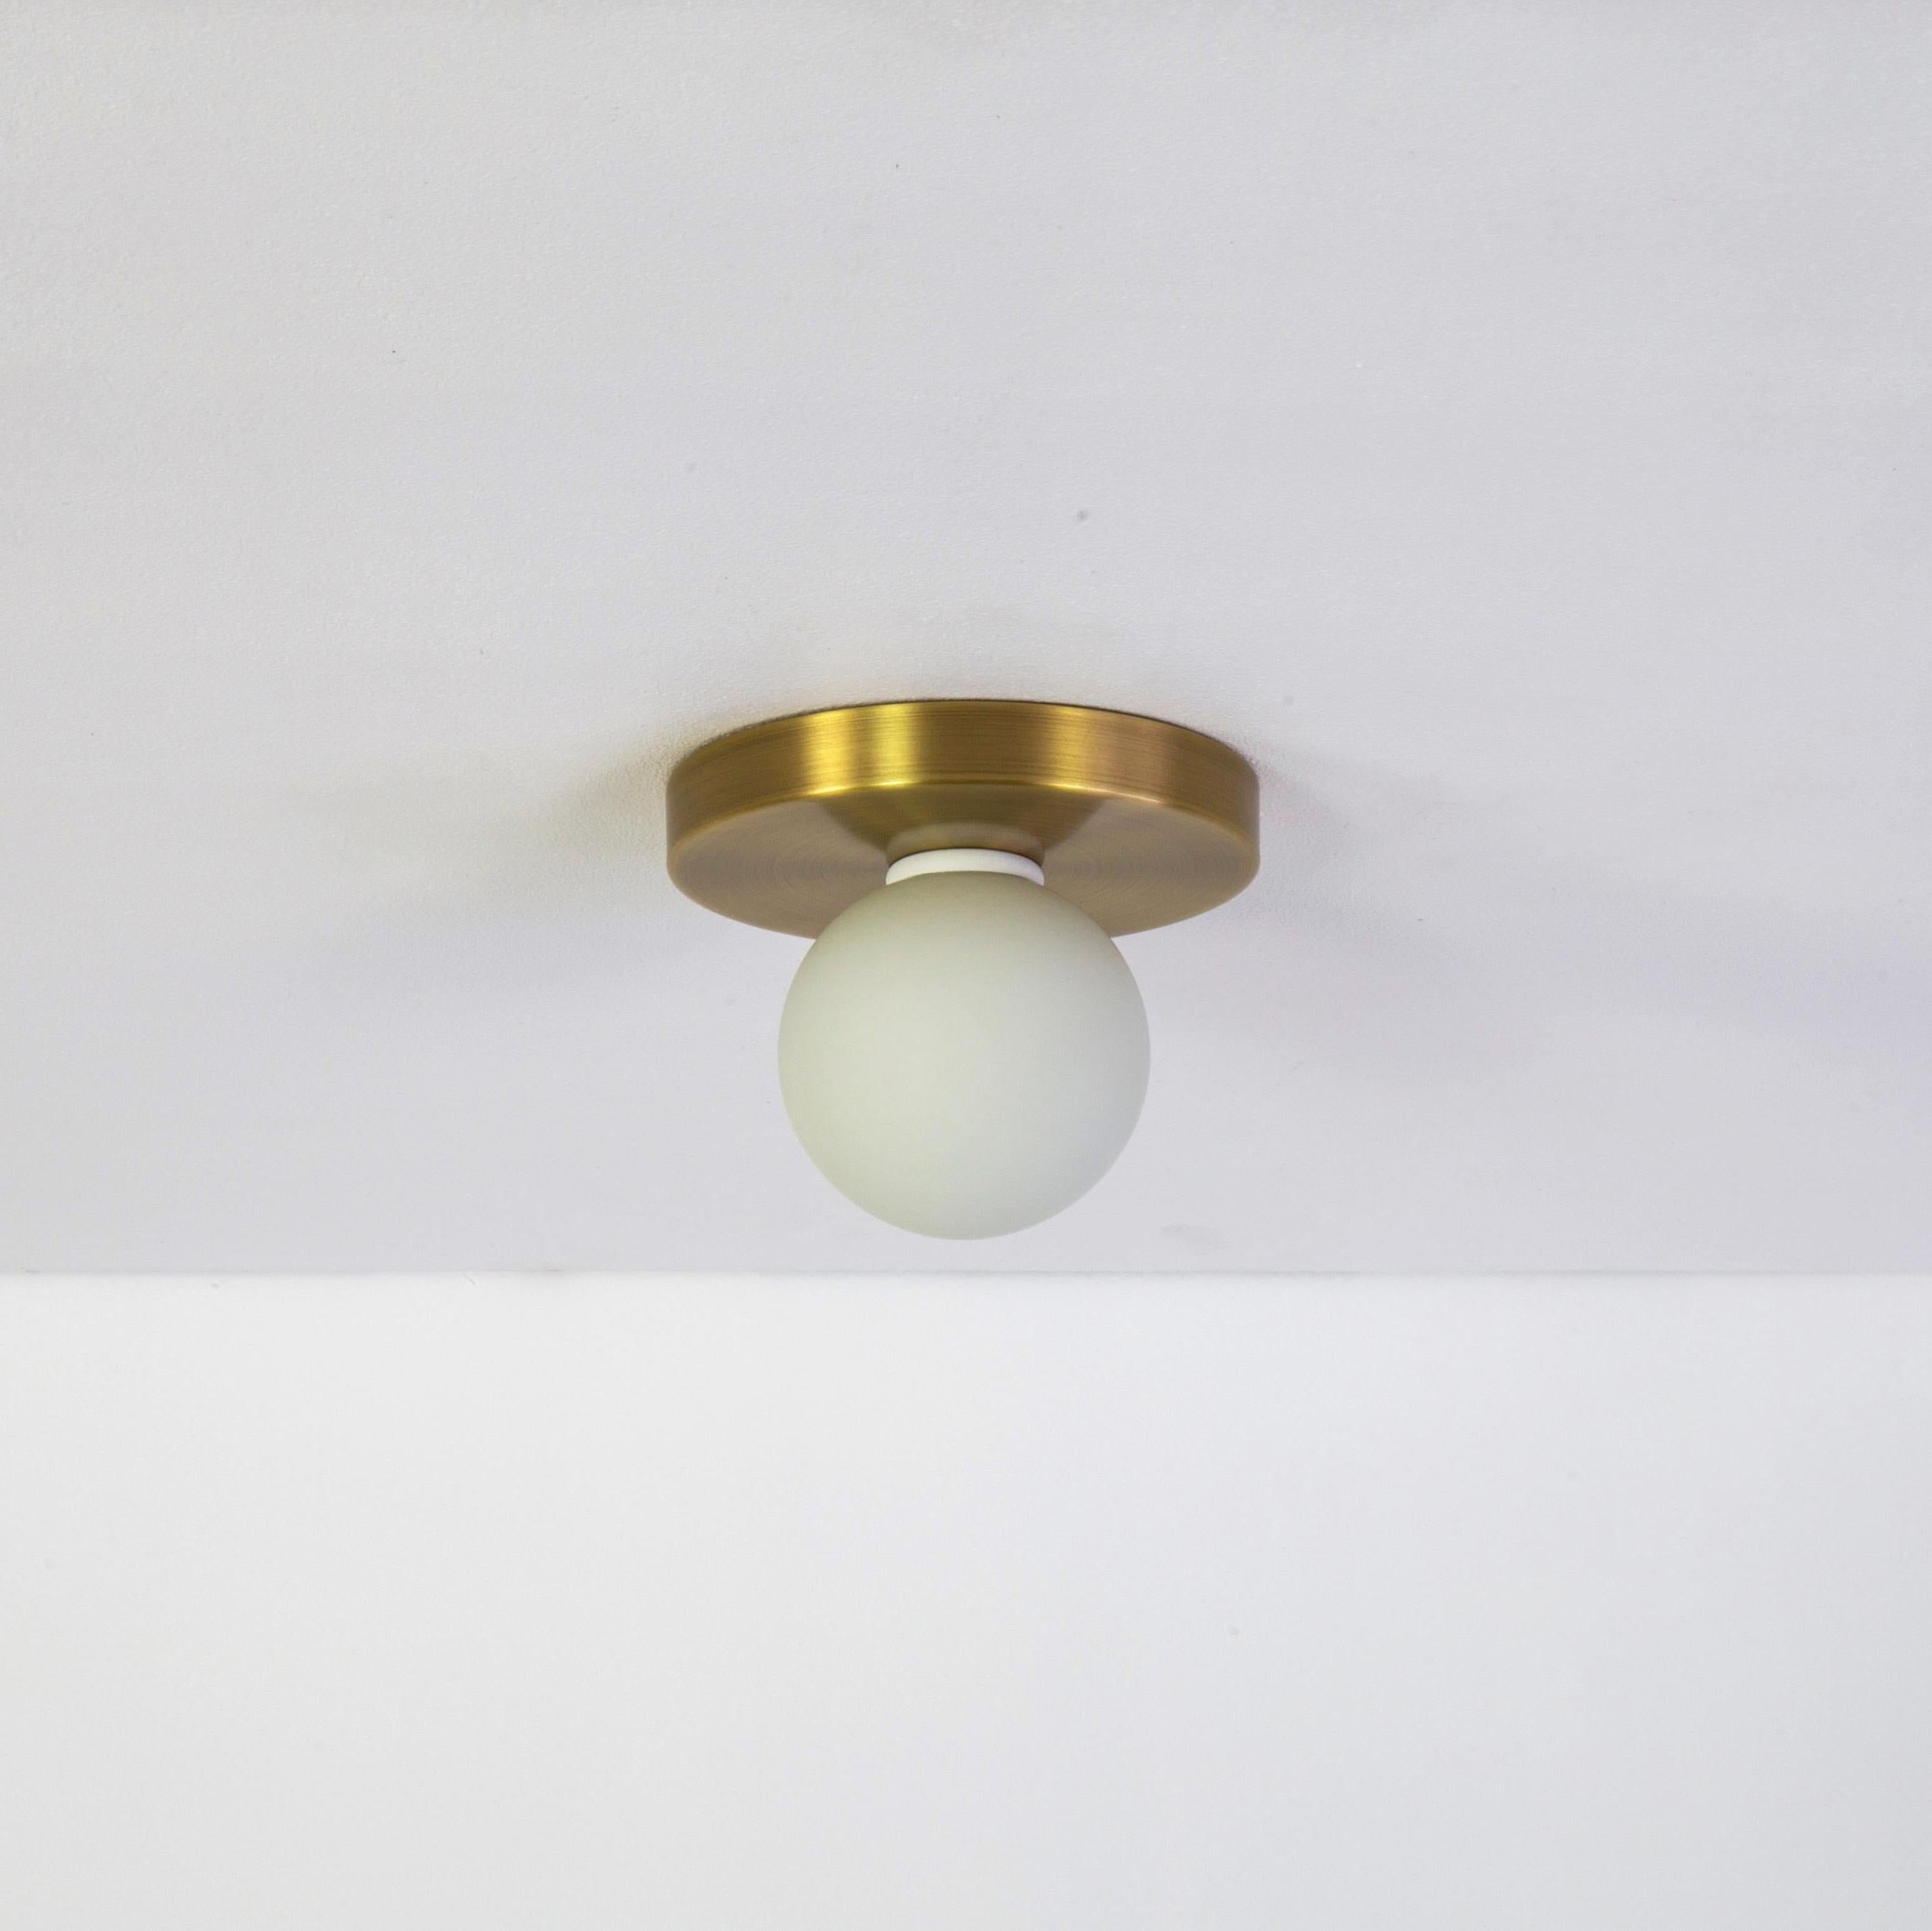 American Set of 4 Globe Flush Mounts by Research.Lighting, Brushed Brass, Made to Order For Sale